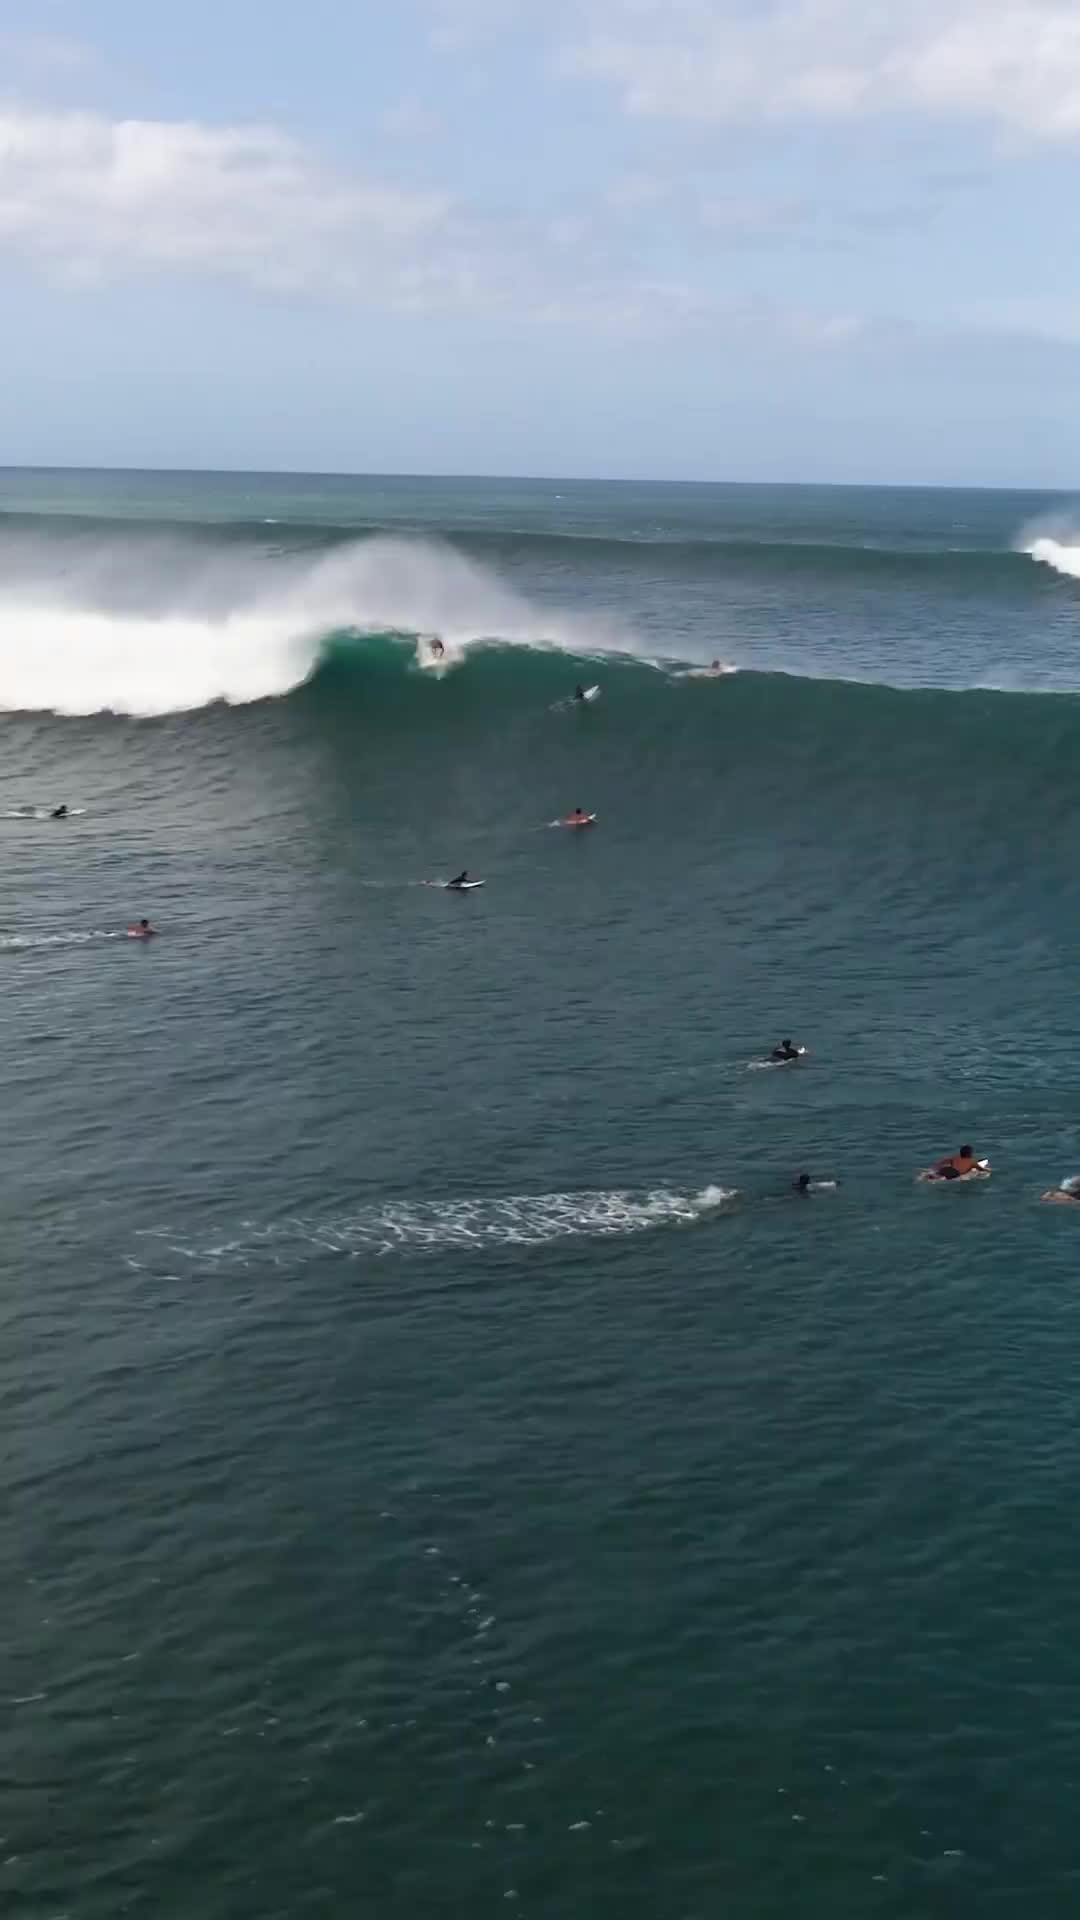 Surfing Banzai Pipeline: Epic Closeout Ride in Hawaii